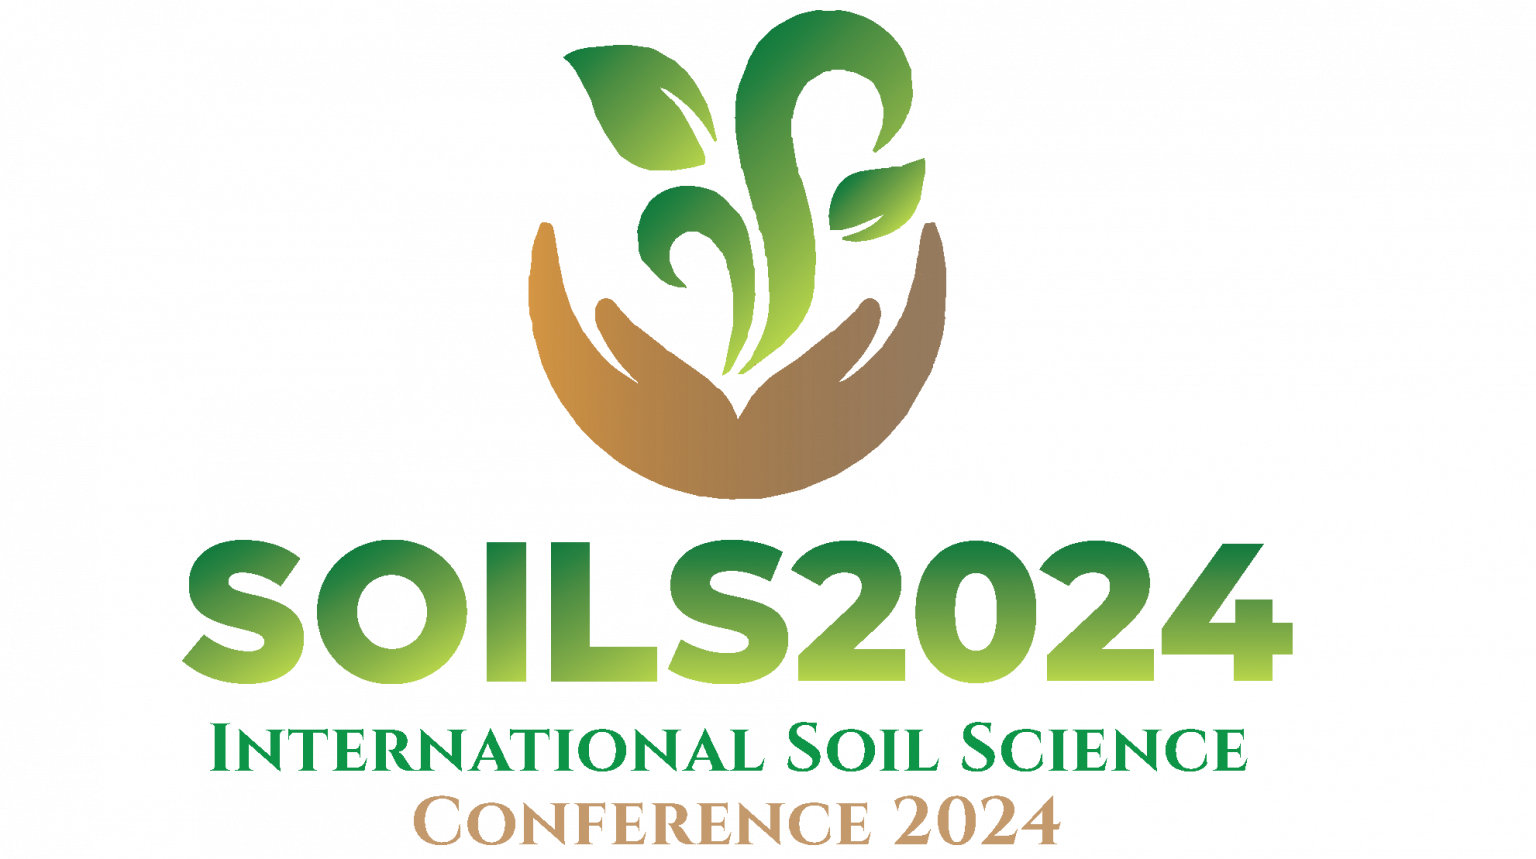 THE INTERNATIONAL SOIL SCIENCE CONFERENCE 2024